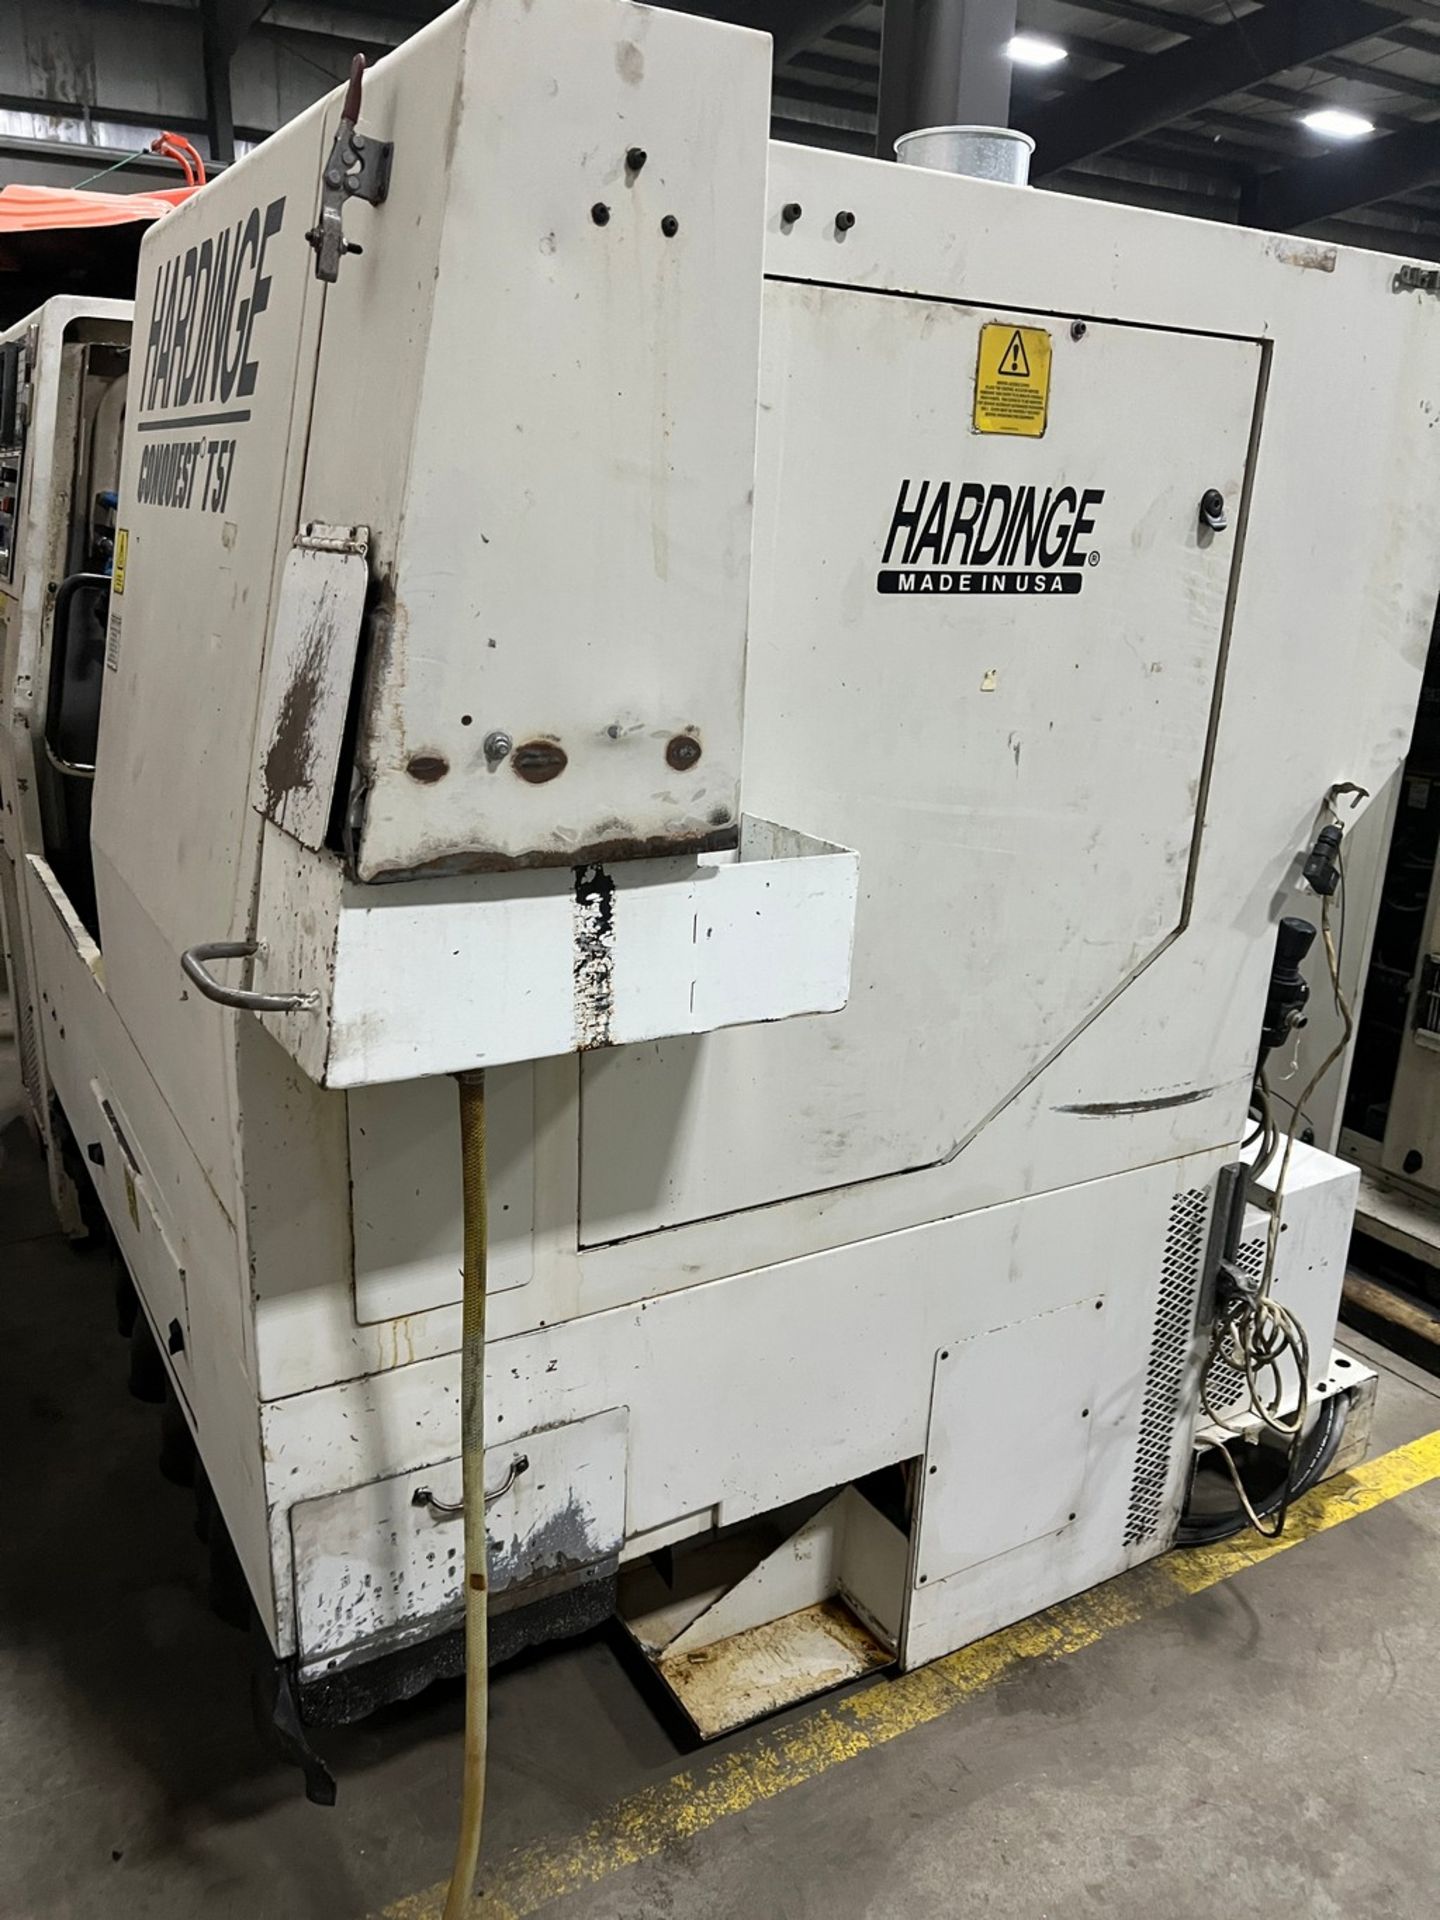 Hardinge Conquest 51 CNC Lathe with Live Milling, S/N CL-852-BC - Image 11 of 14